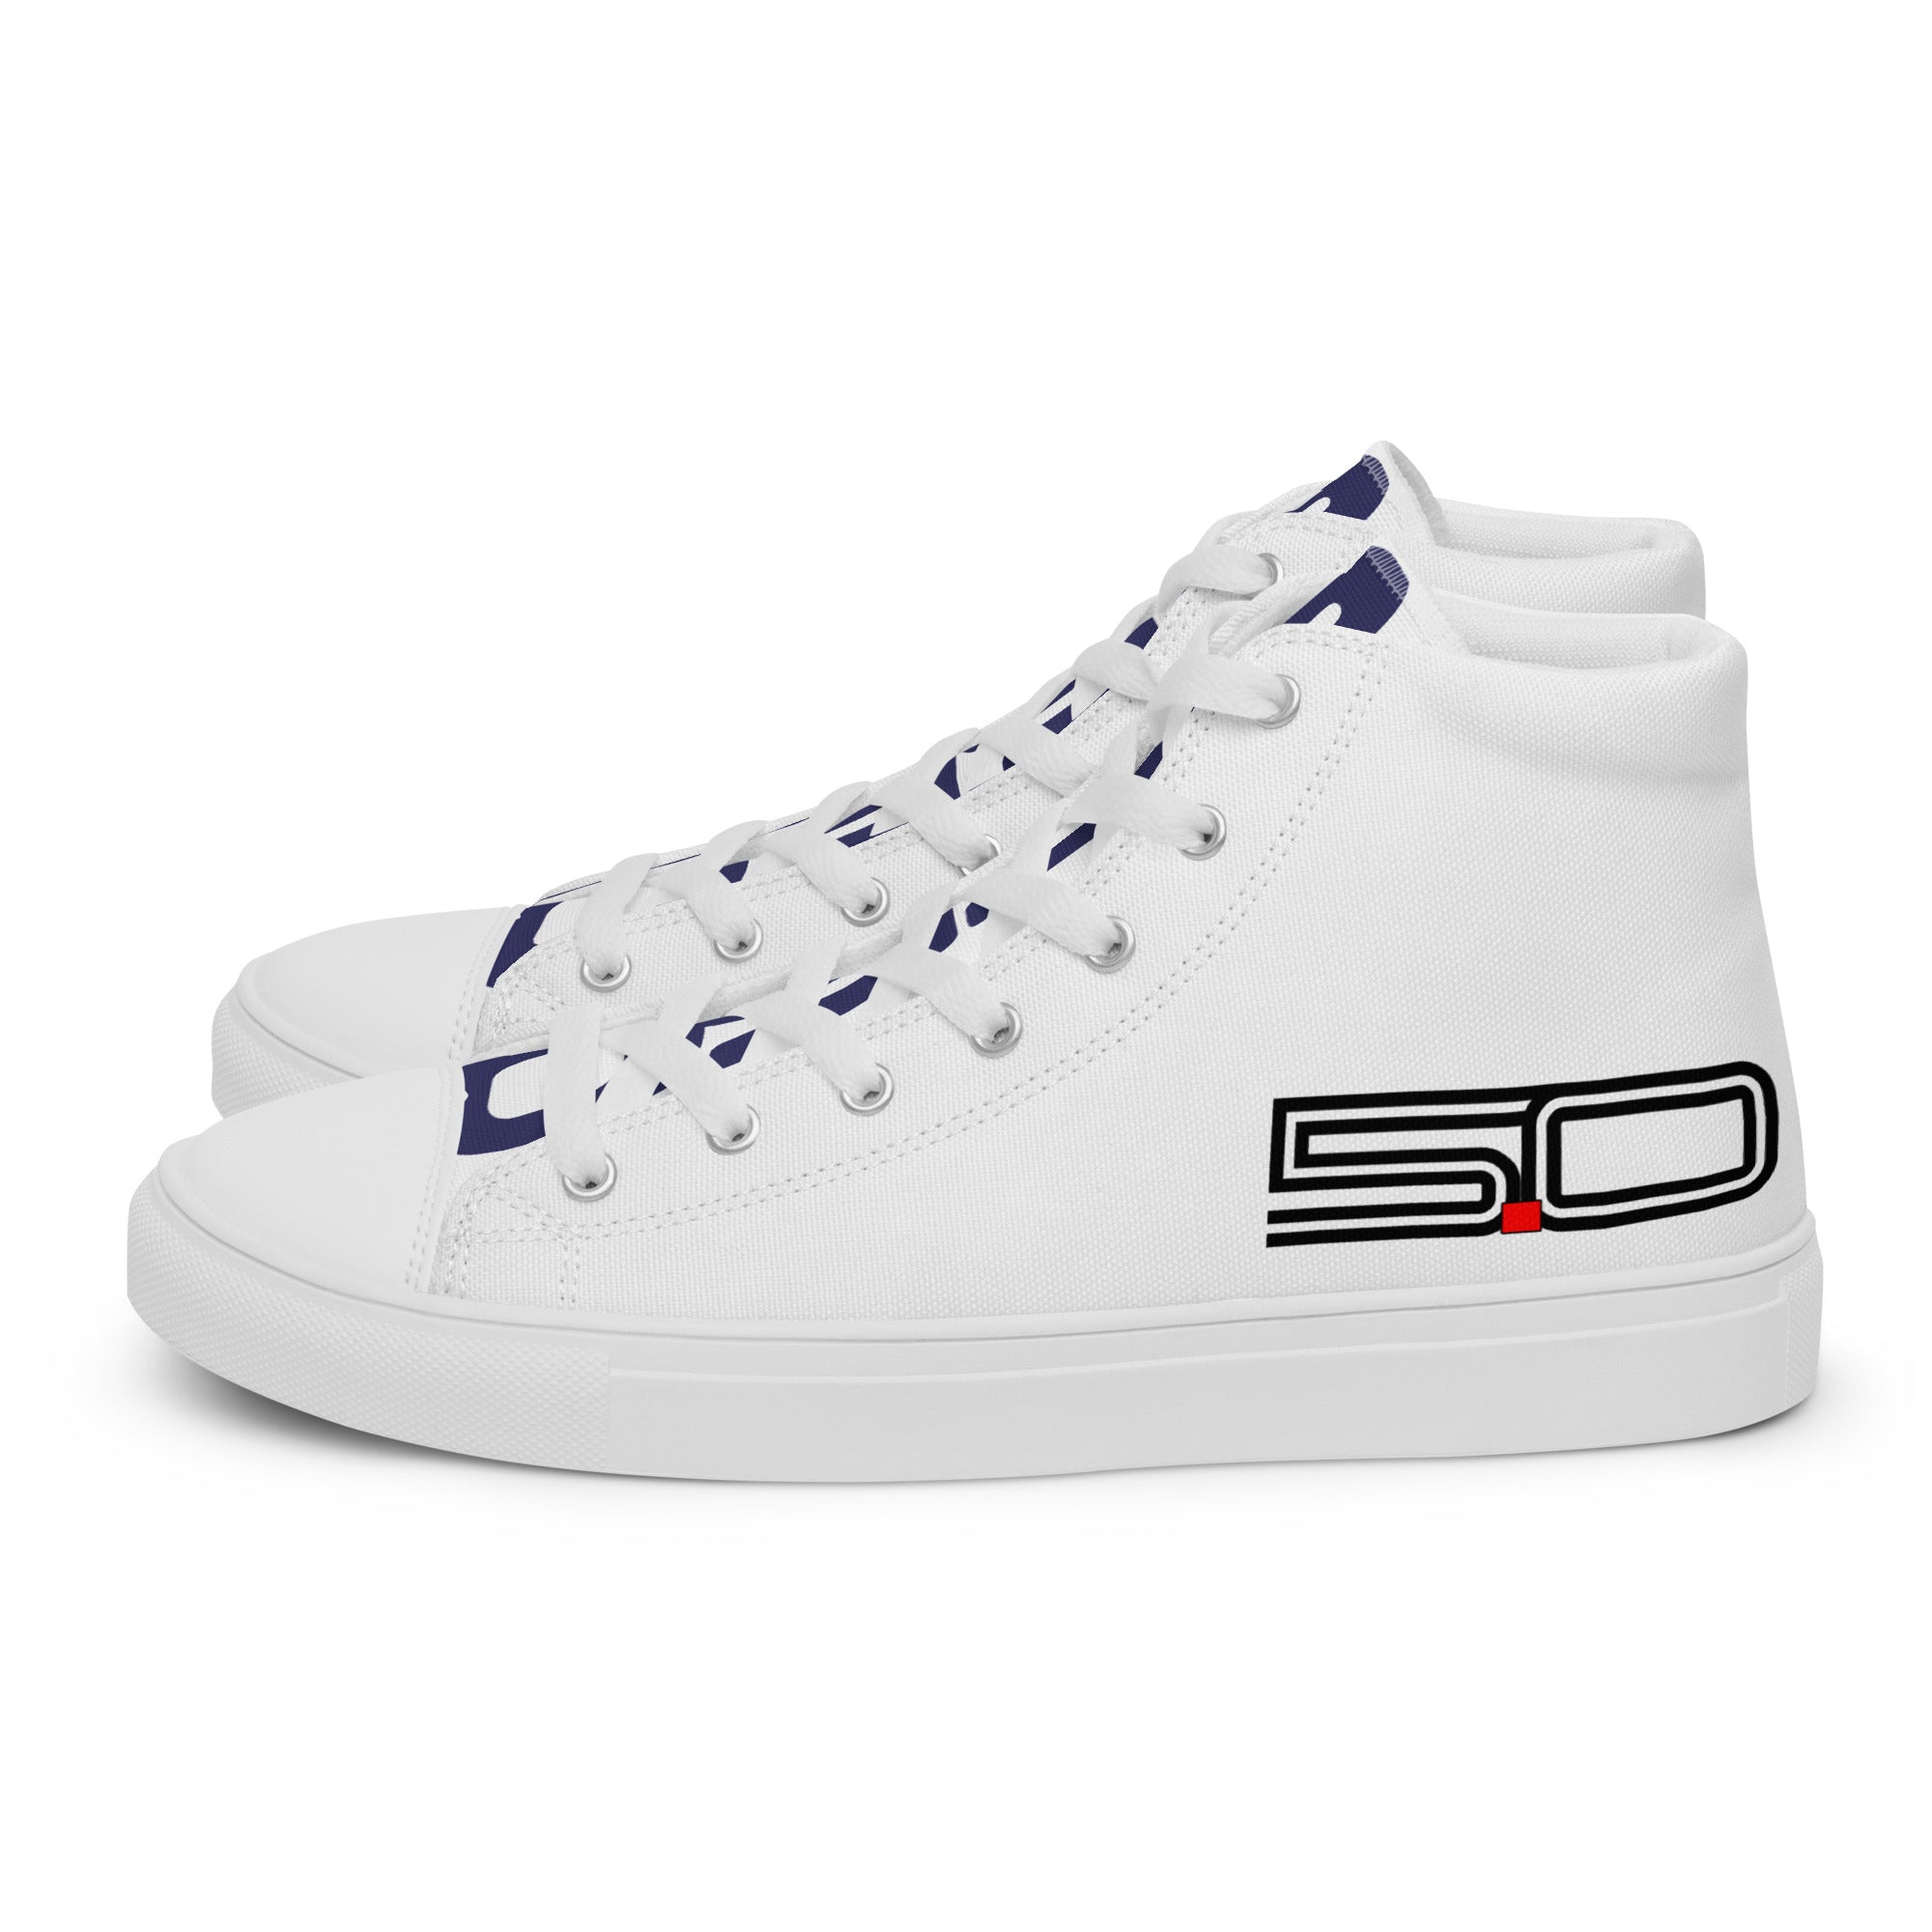 The S550 Men’s high top canvas shoes